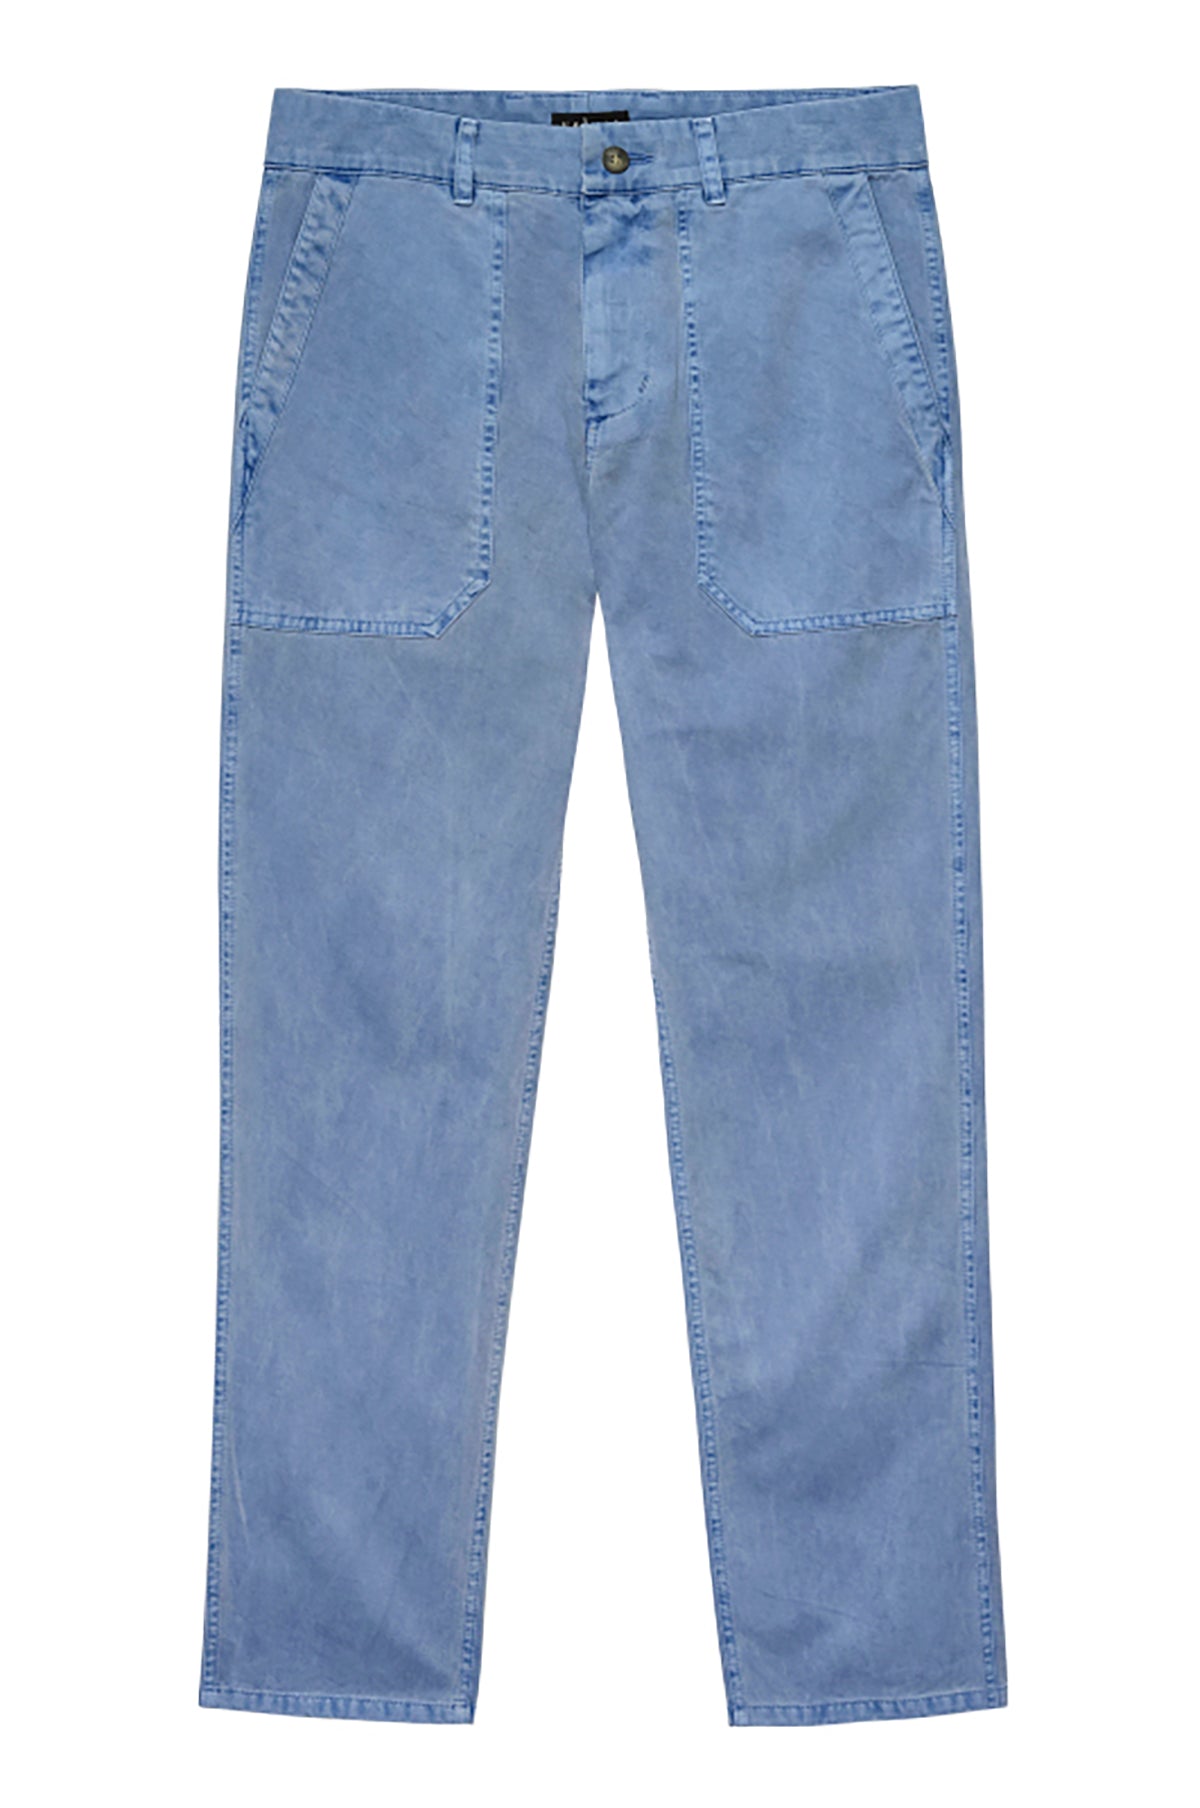 a pair of Velvet by Graham & Spencer RALPH SANDED TWILL PANT jeans with pockets.-26079111119041